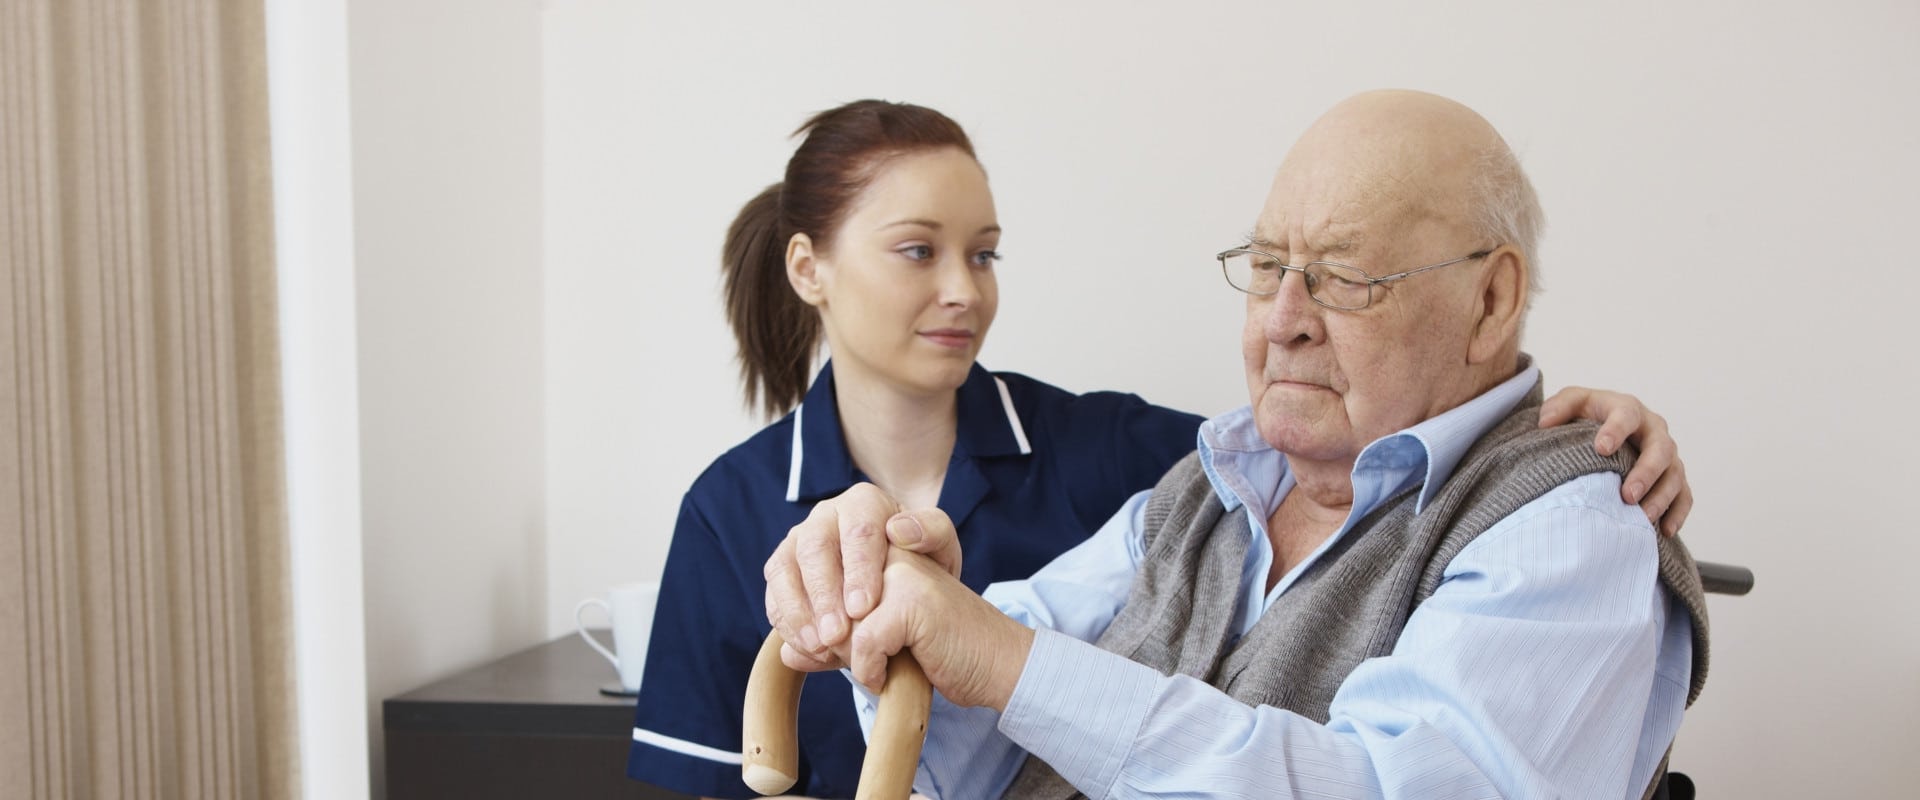 How would you deal with a difficult client or situation as a caregiver?